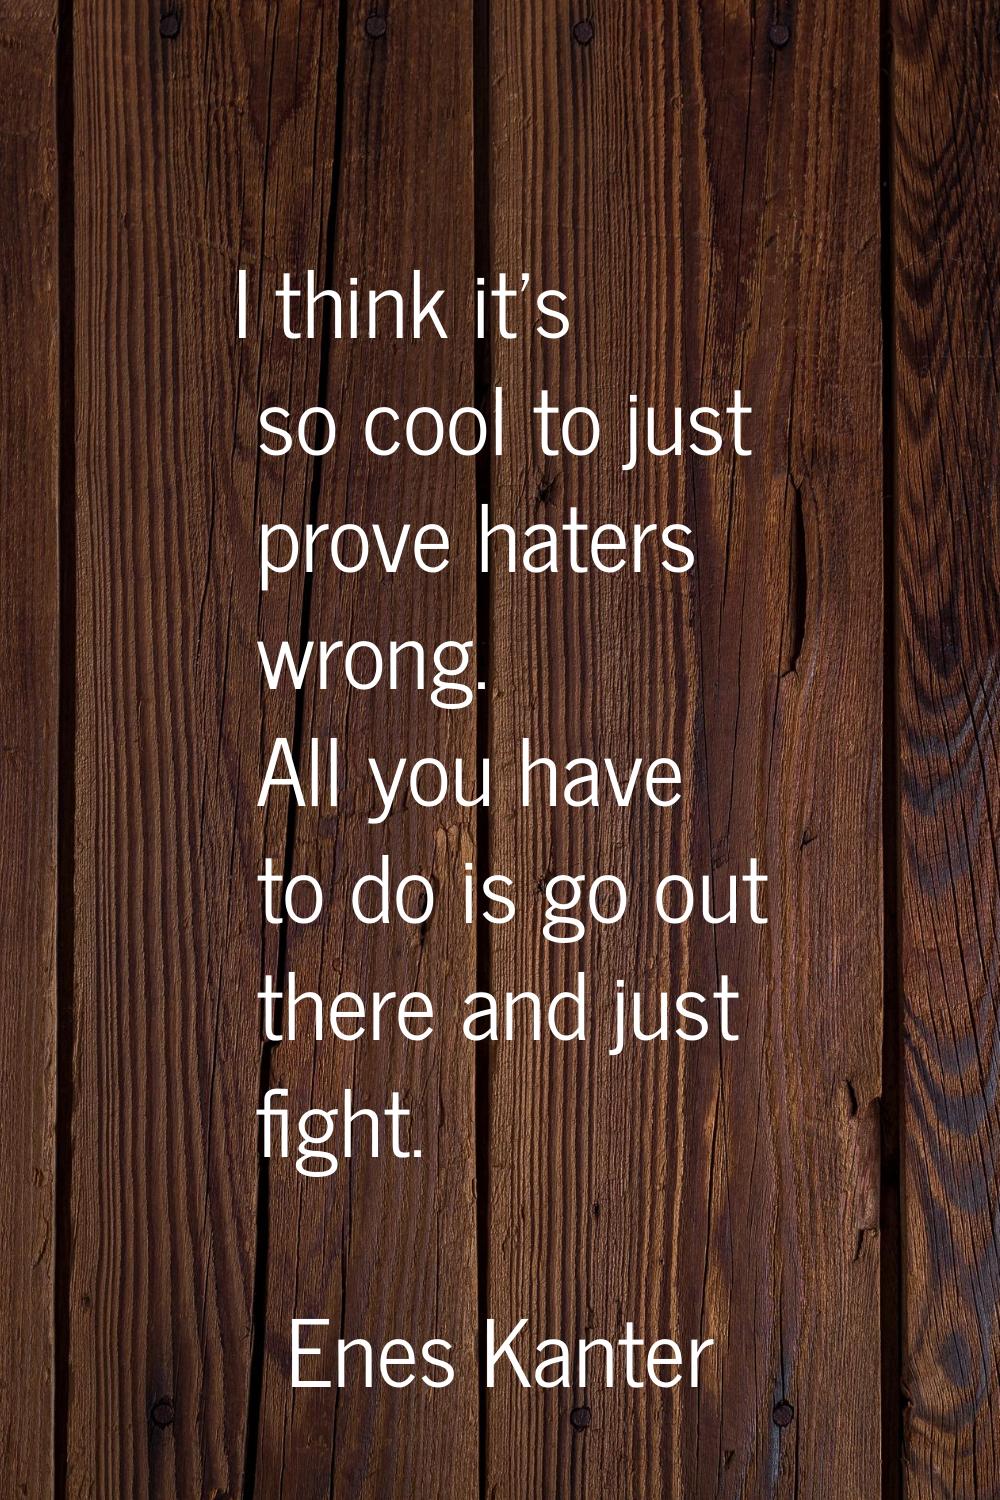 I think it’s so cool to just prove haters wrong. All you have to do is go out there and just fight.